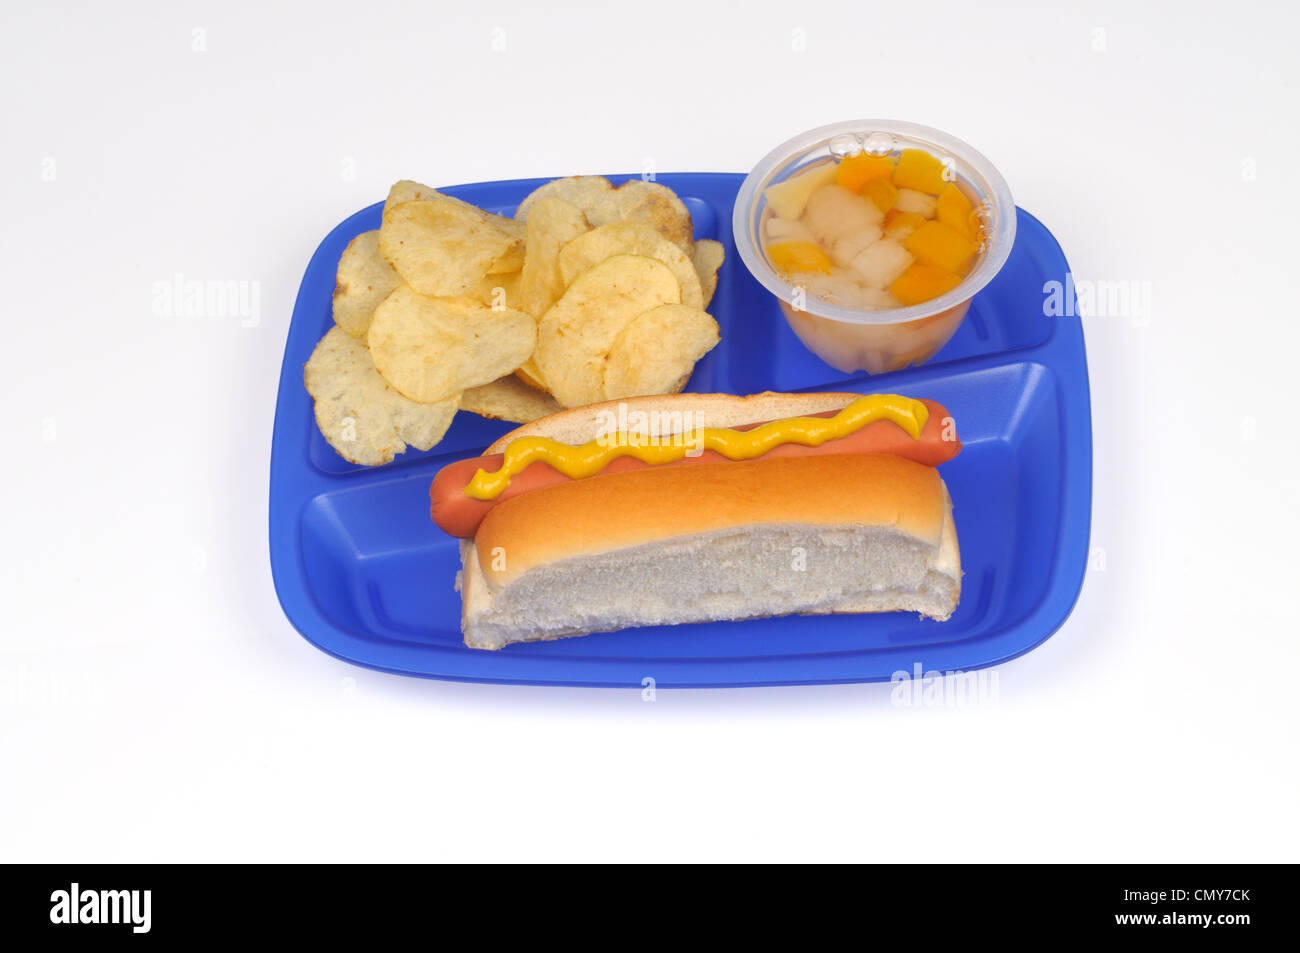 School lunch tray concept with hot dog, potato chips and fruit cup Stock Photo